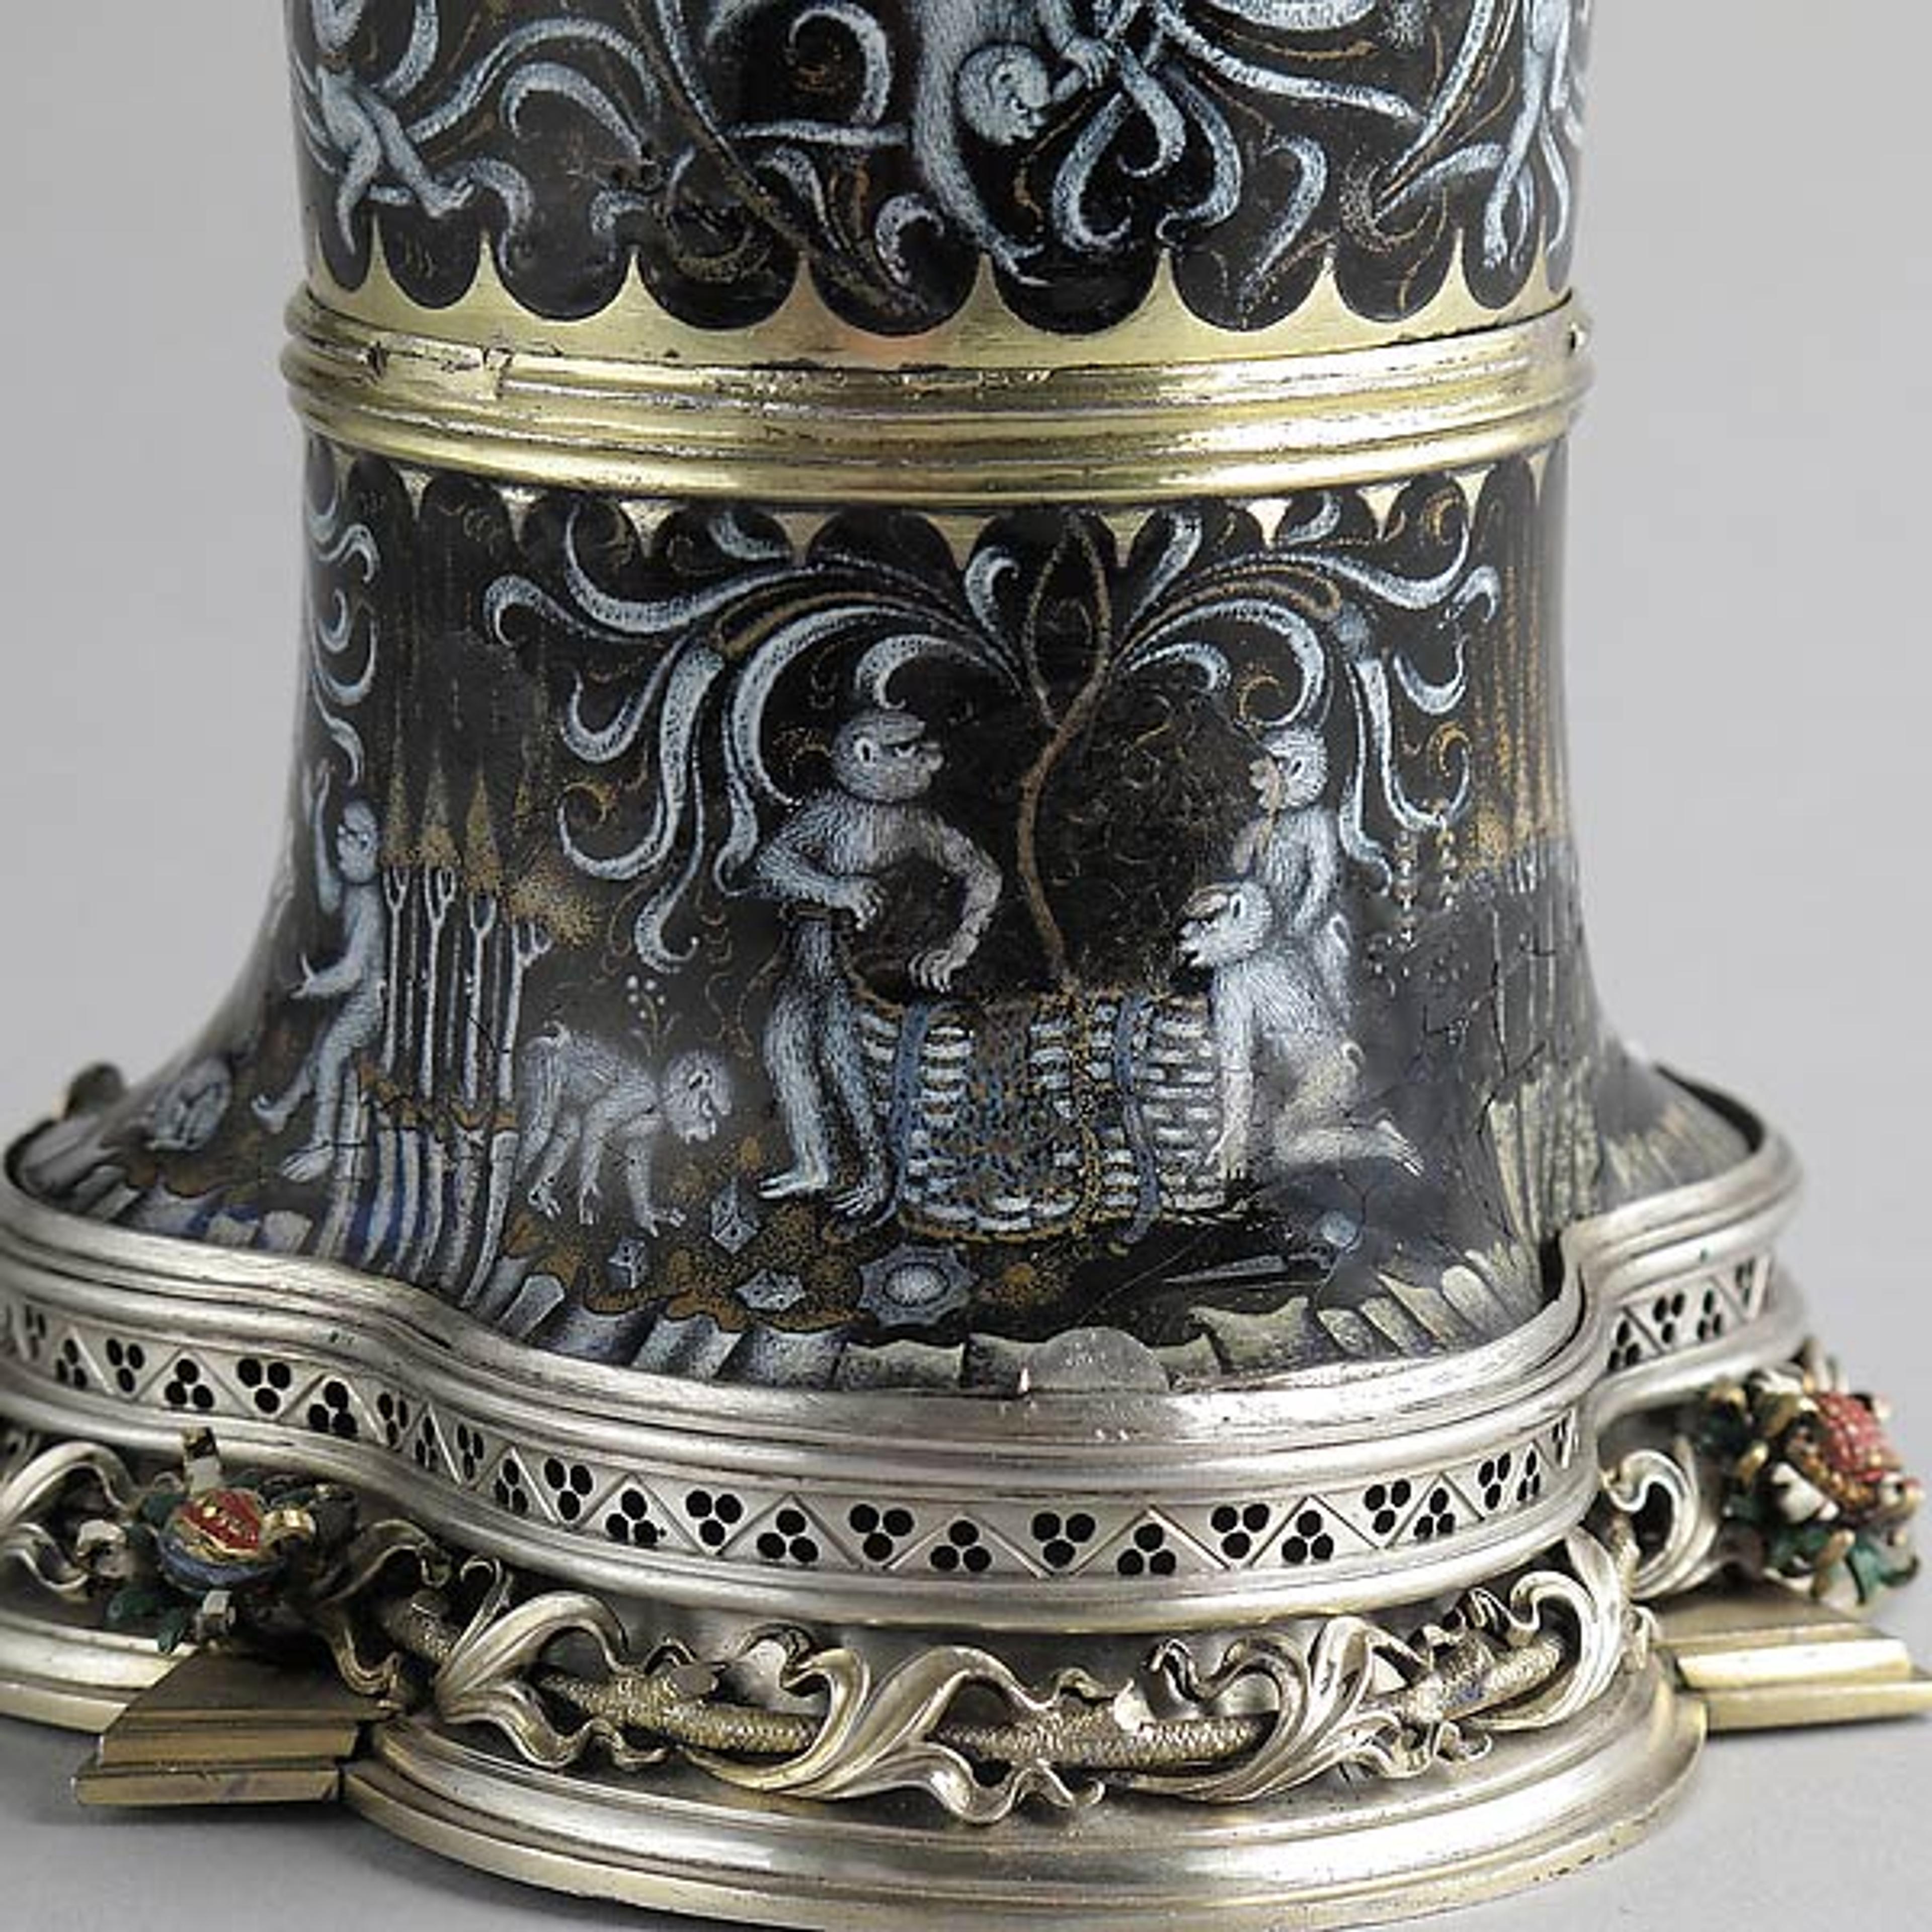 Beaker ("Monkey Cup"), ca. 1425–50. Probably made in the Burgundian territories. Silver, silver gilt, and painted enamel; Overall 7 7/8 x 4 5/8 in. (20 x 11.7 cm). The Metropolitan Museum of Art, The Cloisters Collection, 1952 (52.50)